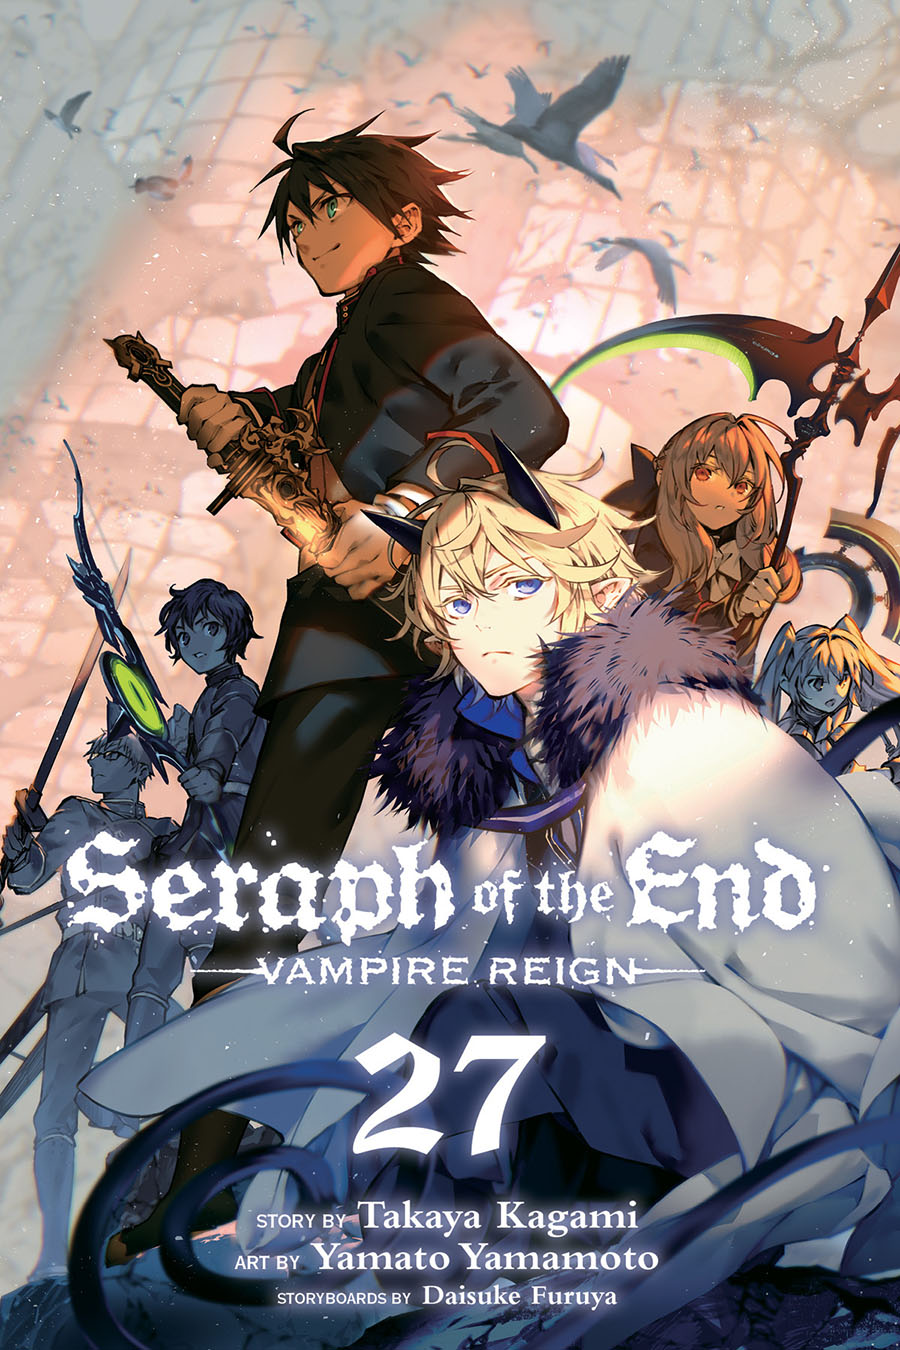 Seraph Of The End Vampire Reign Vol 27 TP